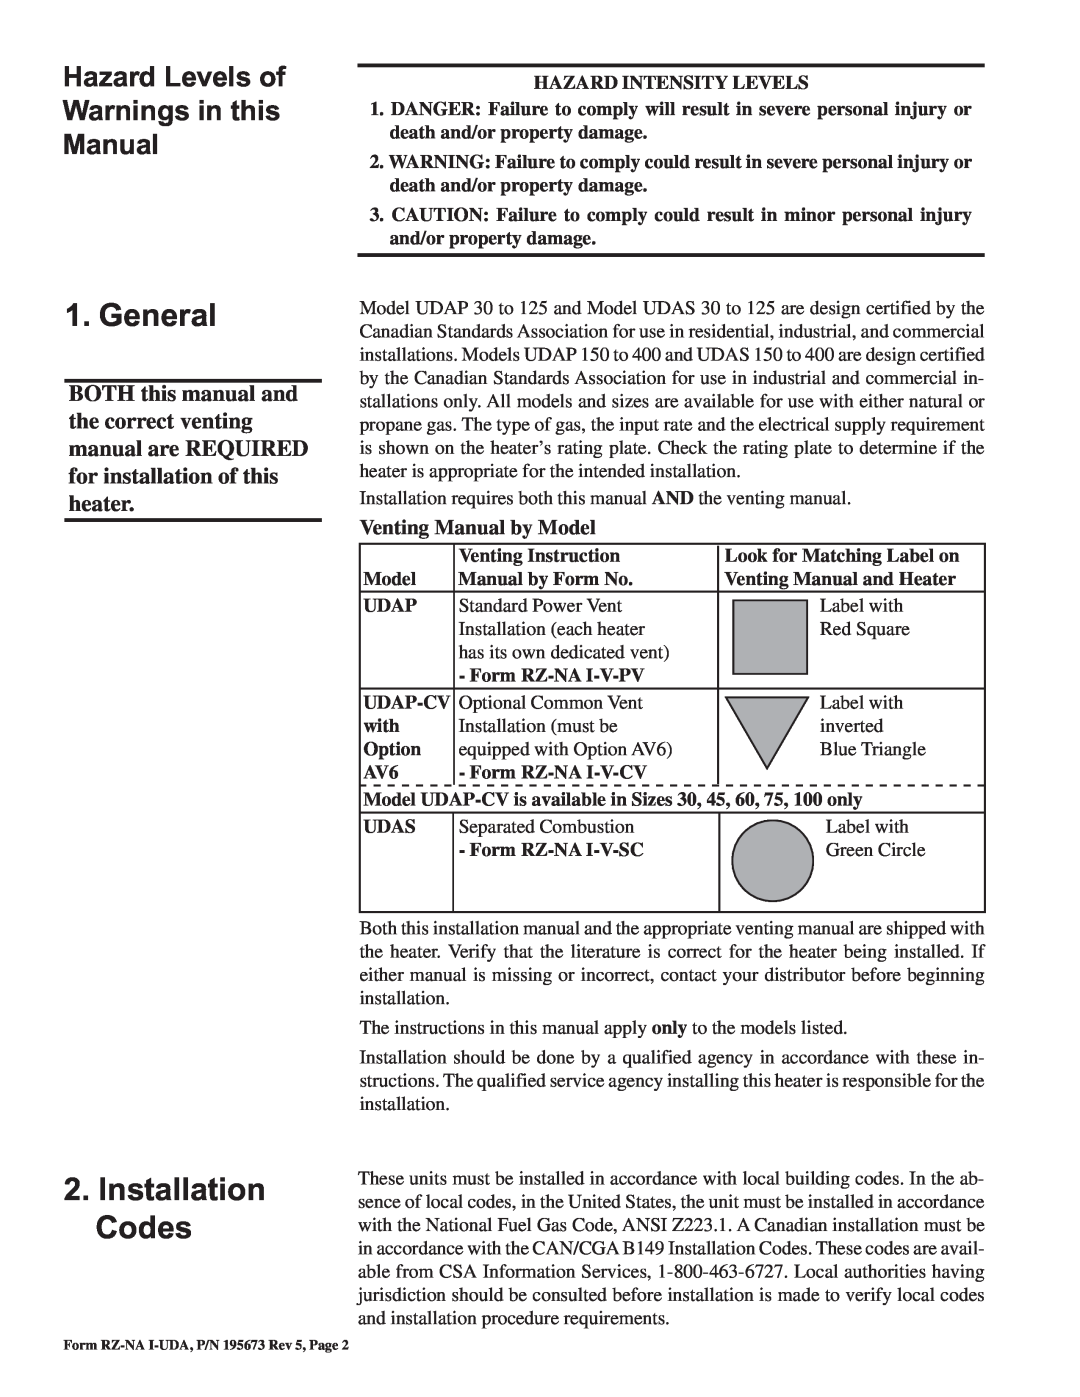 Thomas & Betts UDAS, UDAP General, Installation Codes, Hazard Levels of Warnings in this Manual, Venting Manual by Model 